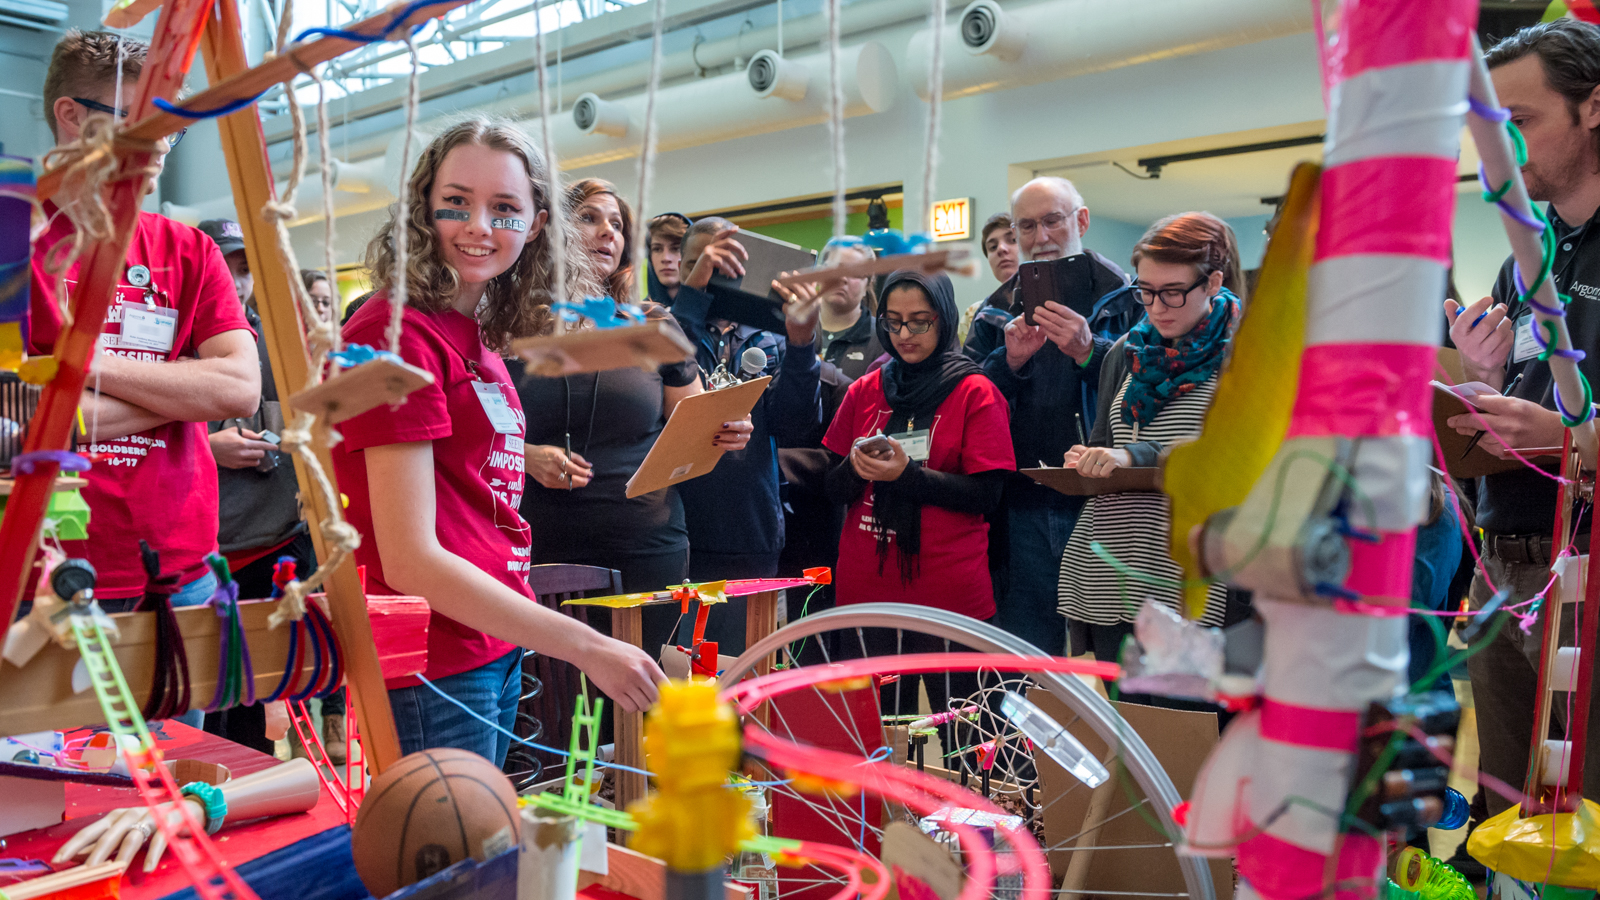 A student from Glenbard South High School provides a narrative of the ball’s journey through the machine as onlookers and judges watch at the Rube Goldberg Machine Contest.